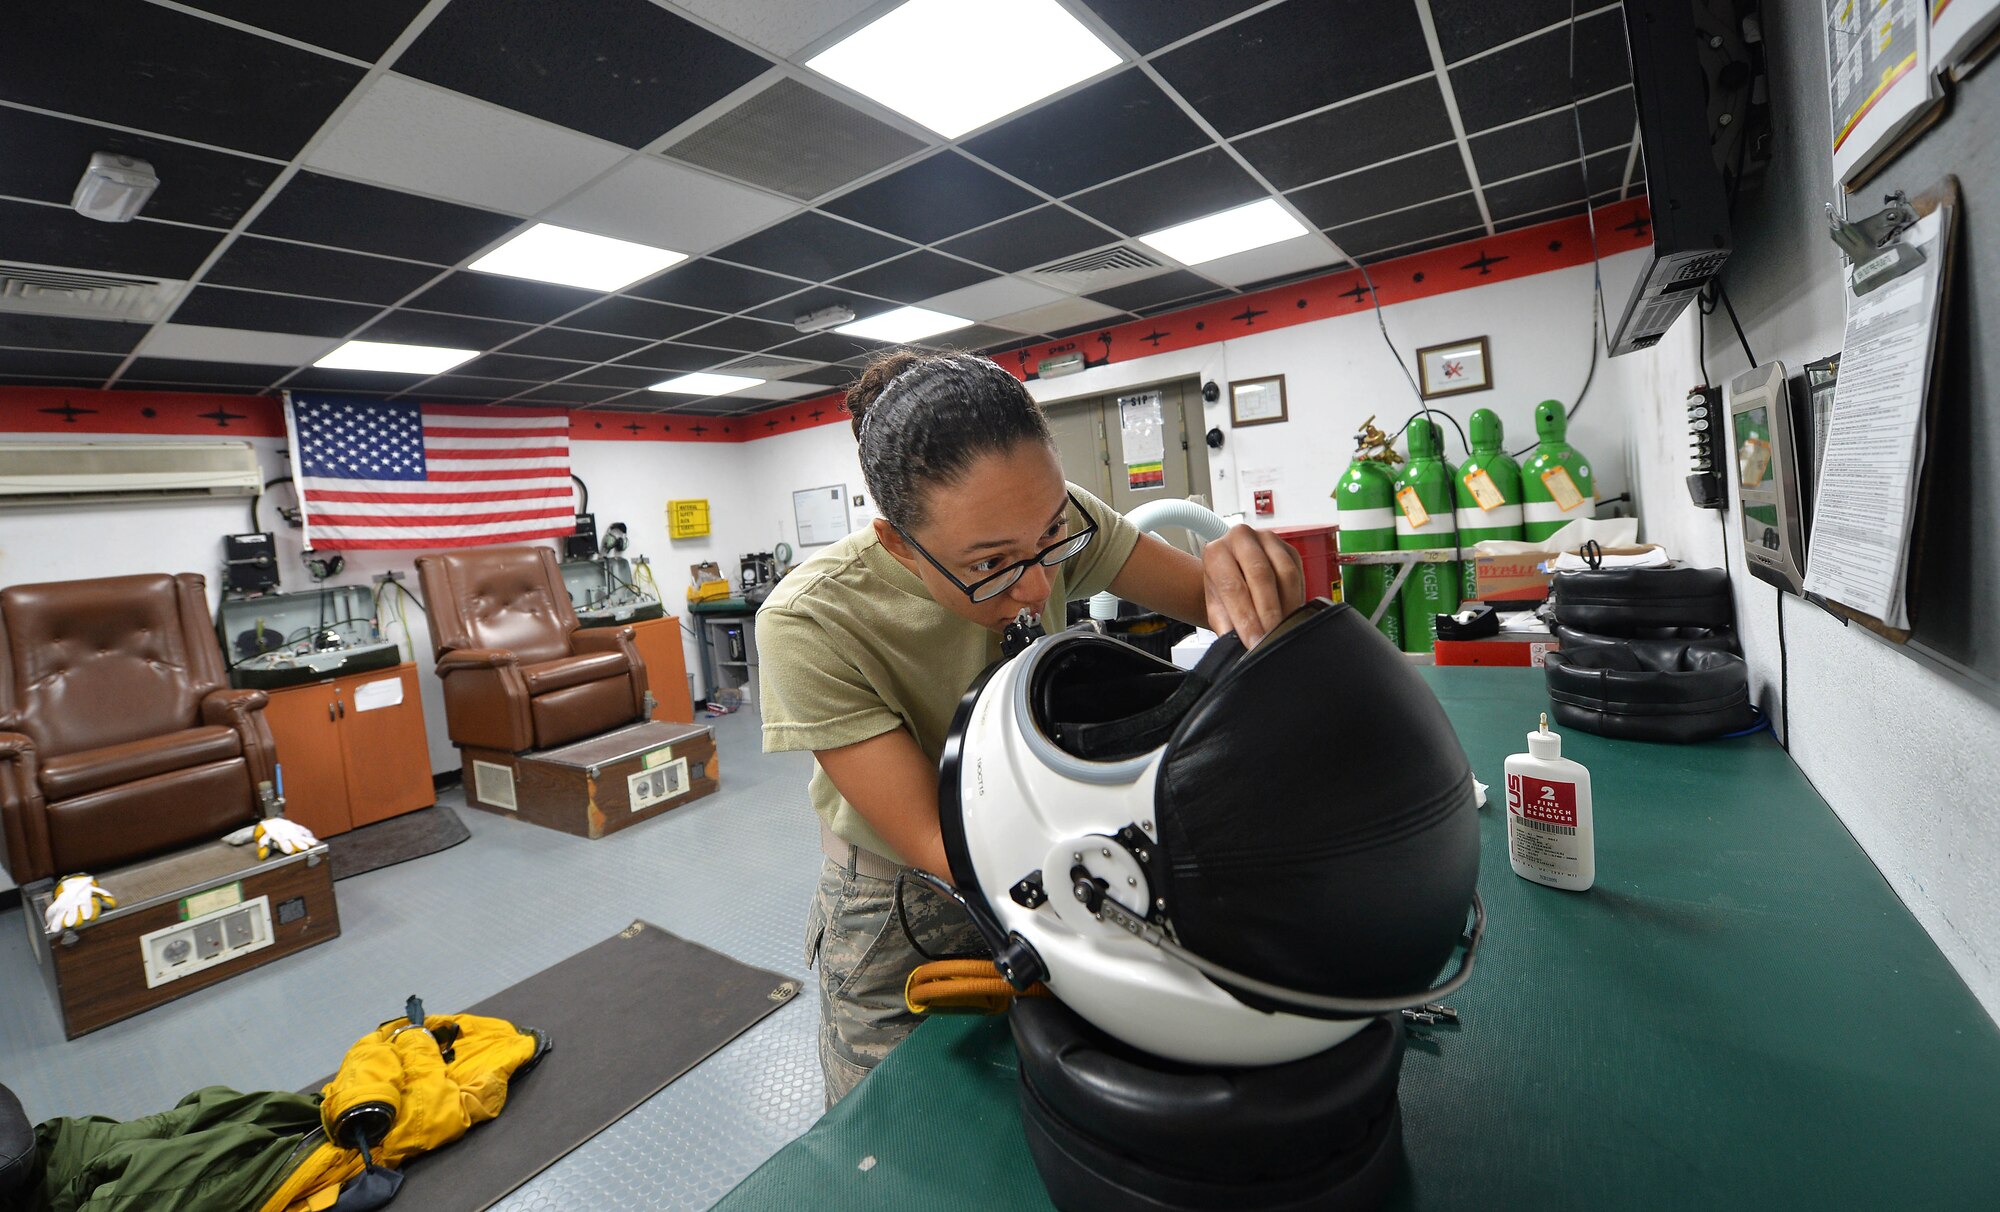 Airman First Class Christian, Expeditionary Reconnaissance Squadron physiology support technician, prepares a full pressure suit helmet at an undisclosed location in Southwest Asia Aug. 7, 2015. U-2 pilots are required to wear the specialized suit due to the high altitudes they typically fly at. The physiological support detachment team is responsible for maintaining the suit, ensuring it functions properly and assisting pilots with donning the gear. (U.S. Air Force photo/Tech. Sgt. Jeff Andrejcik)